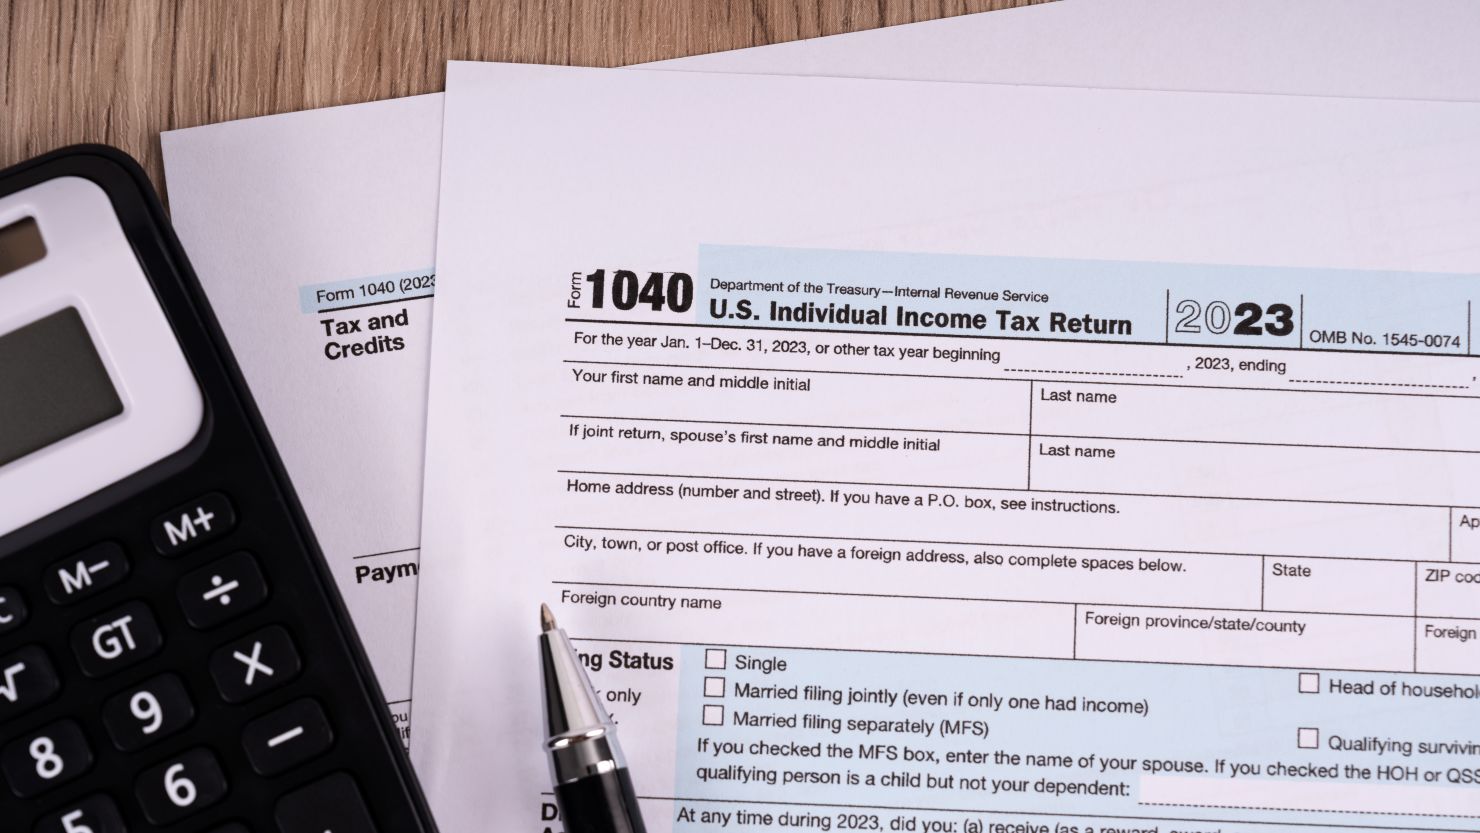 It may be too late for investors save big on taxes this year, but it's not too soon to start thinking about next year.